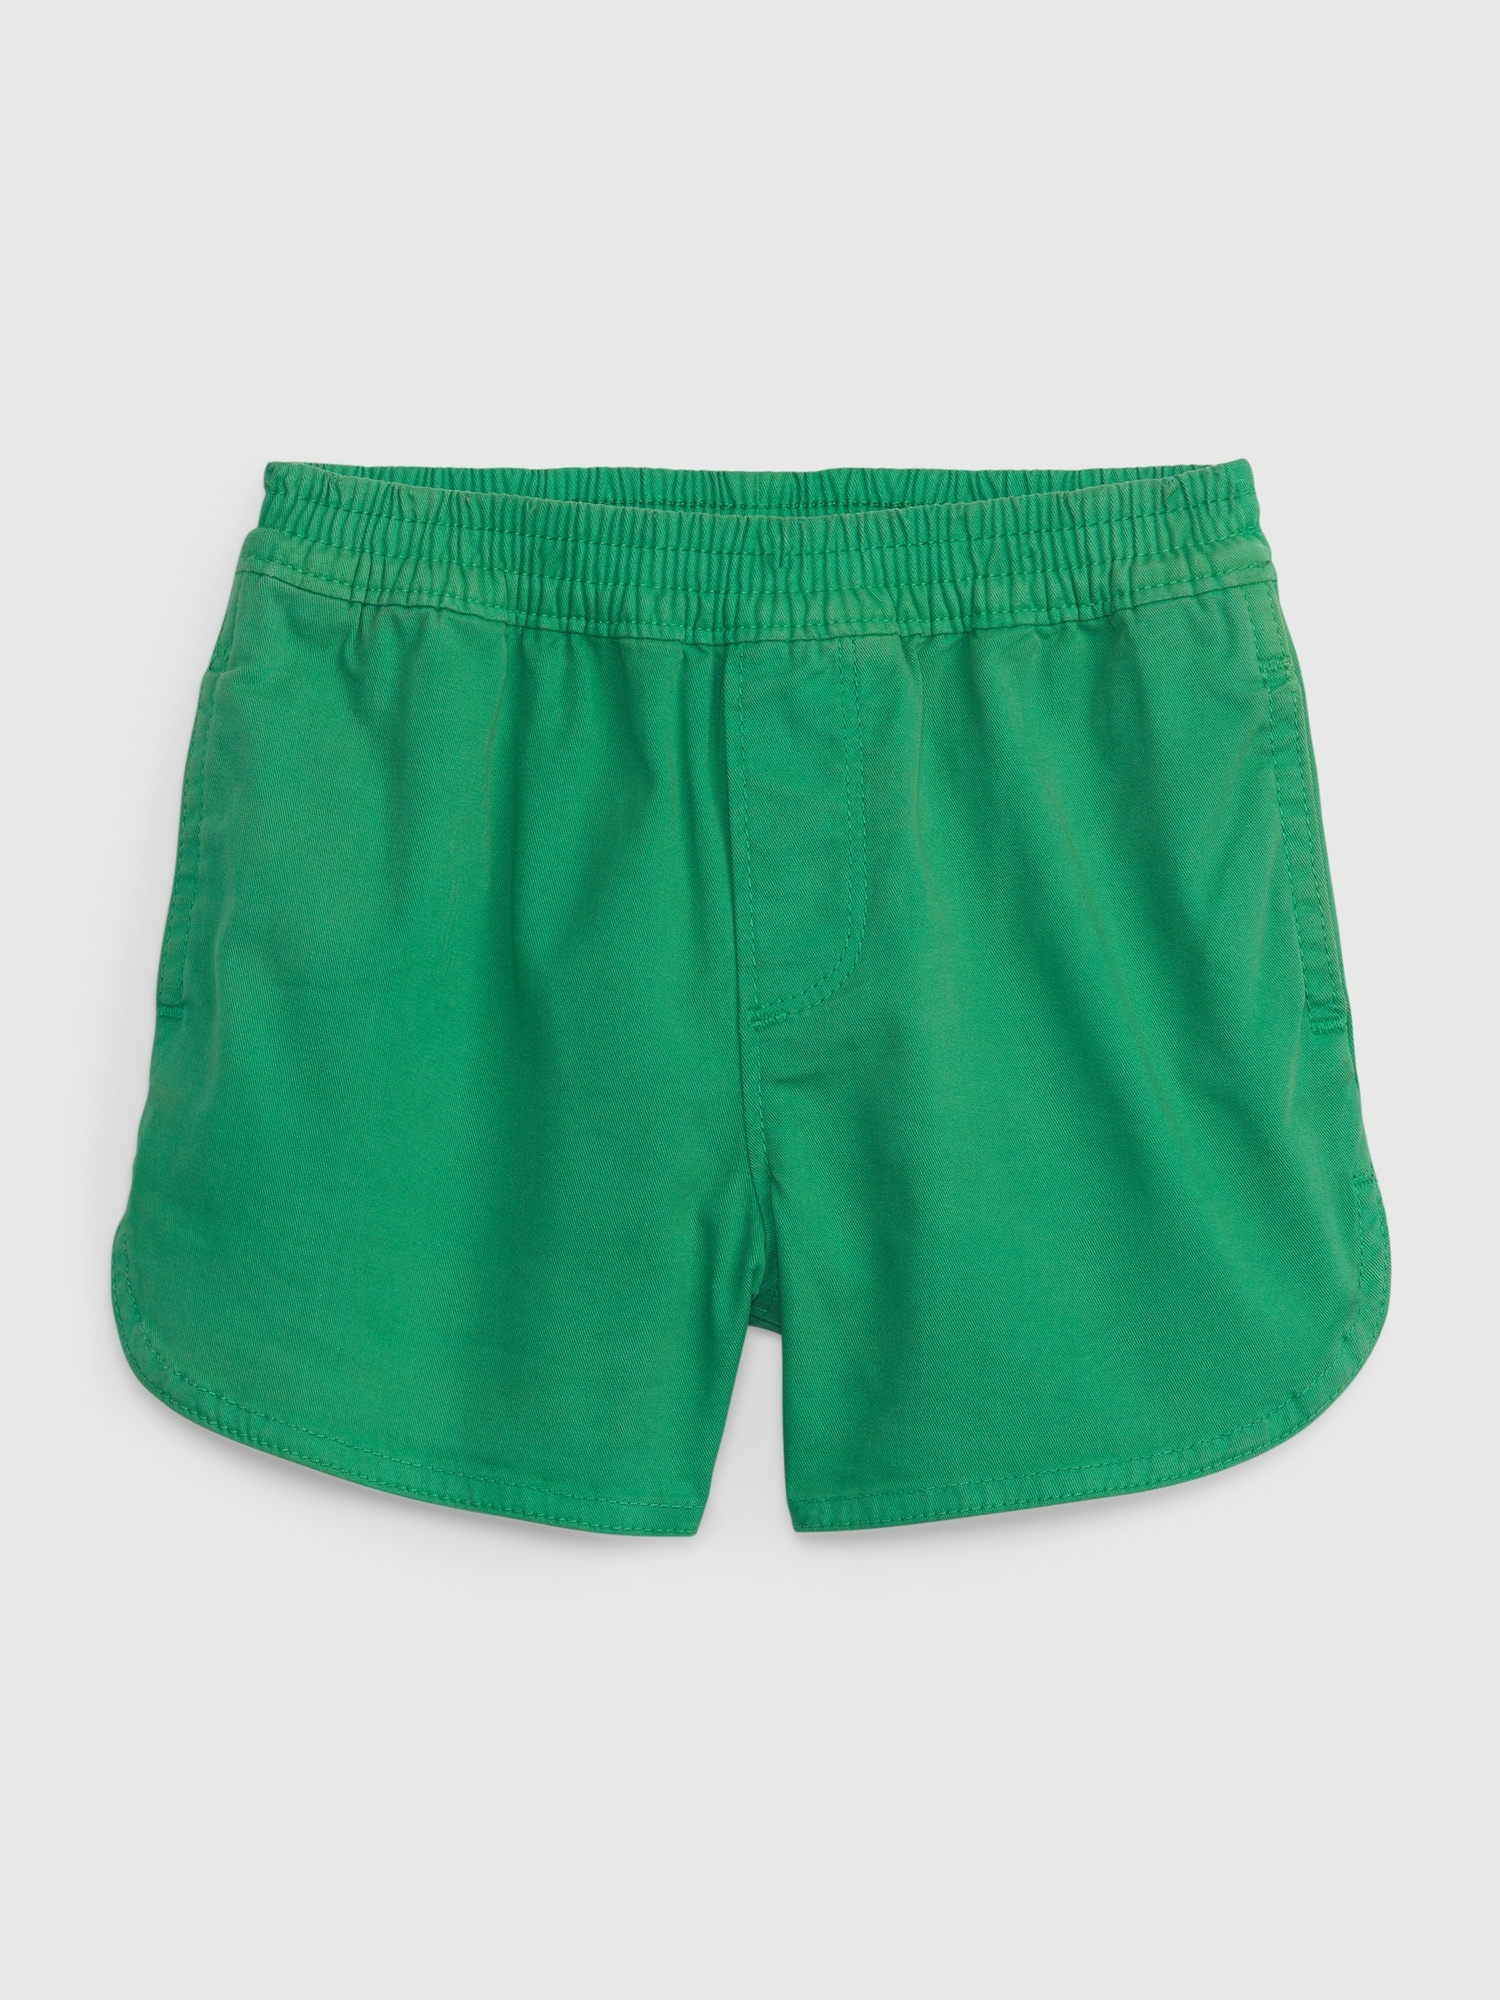 Gap Toddler Pull-On Dolphin Shorts green. 1